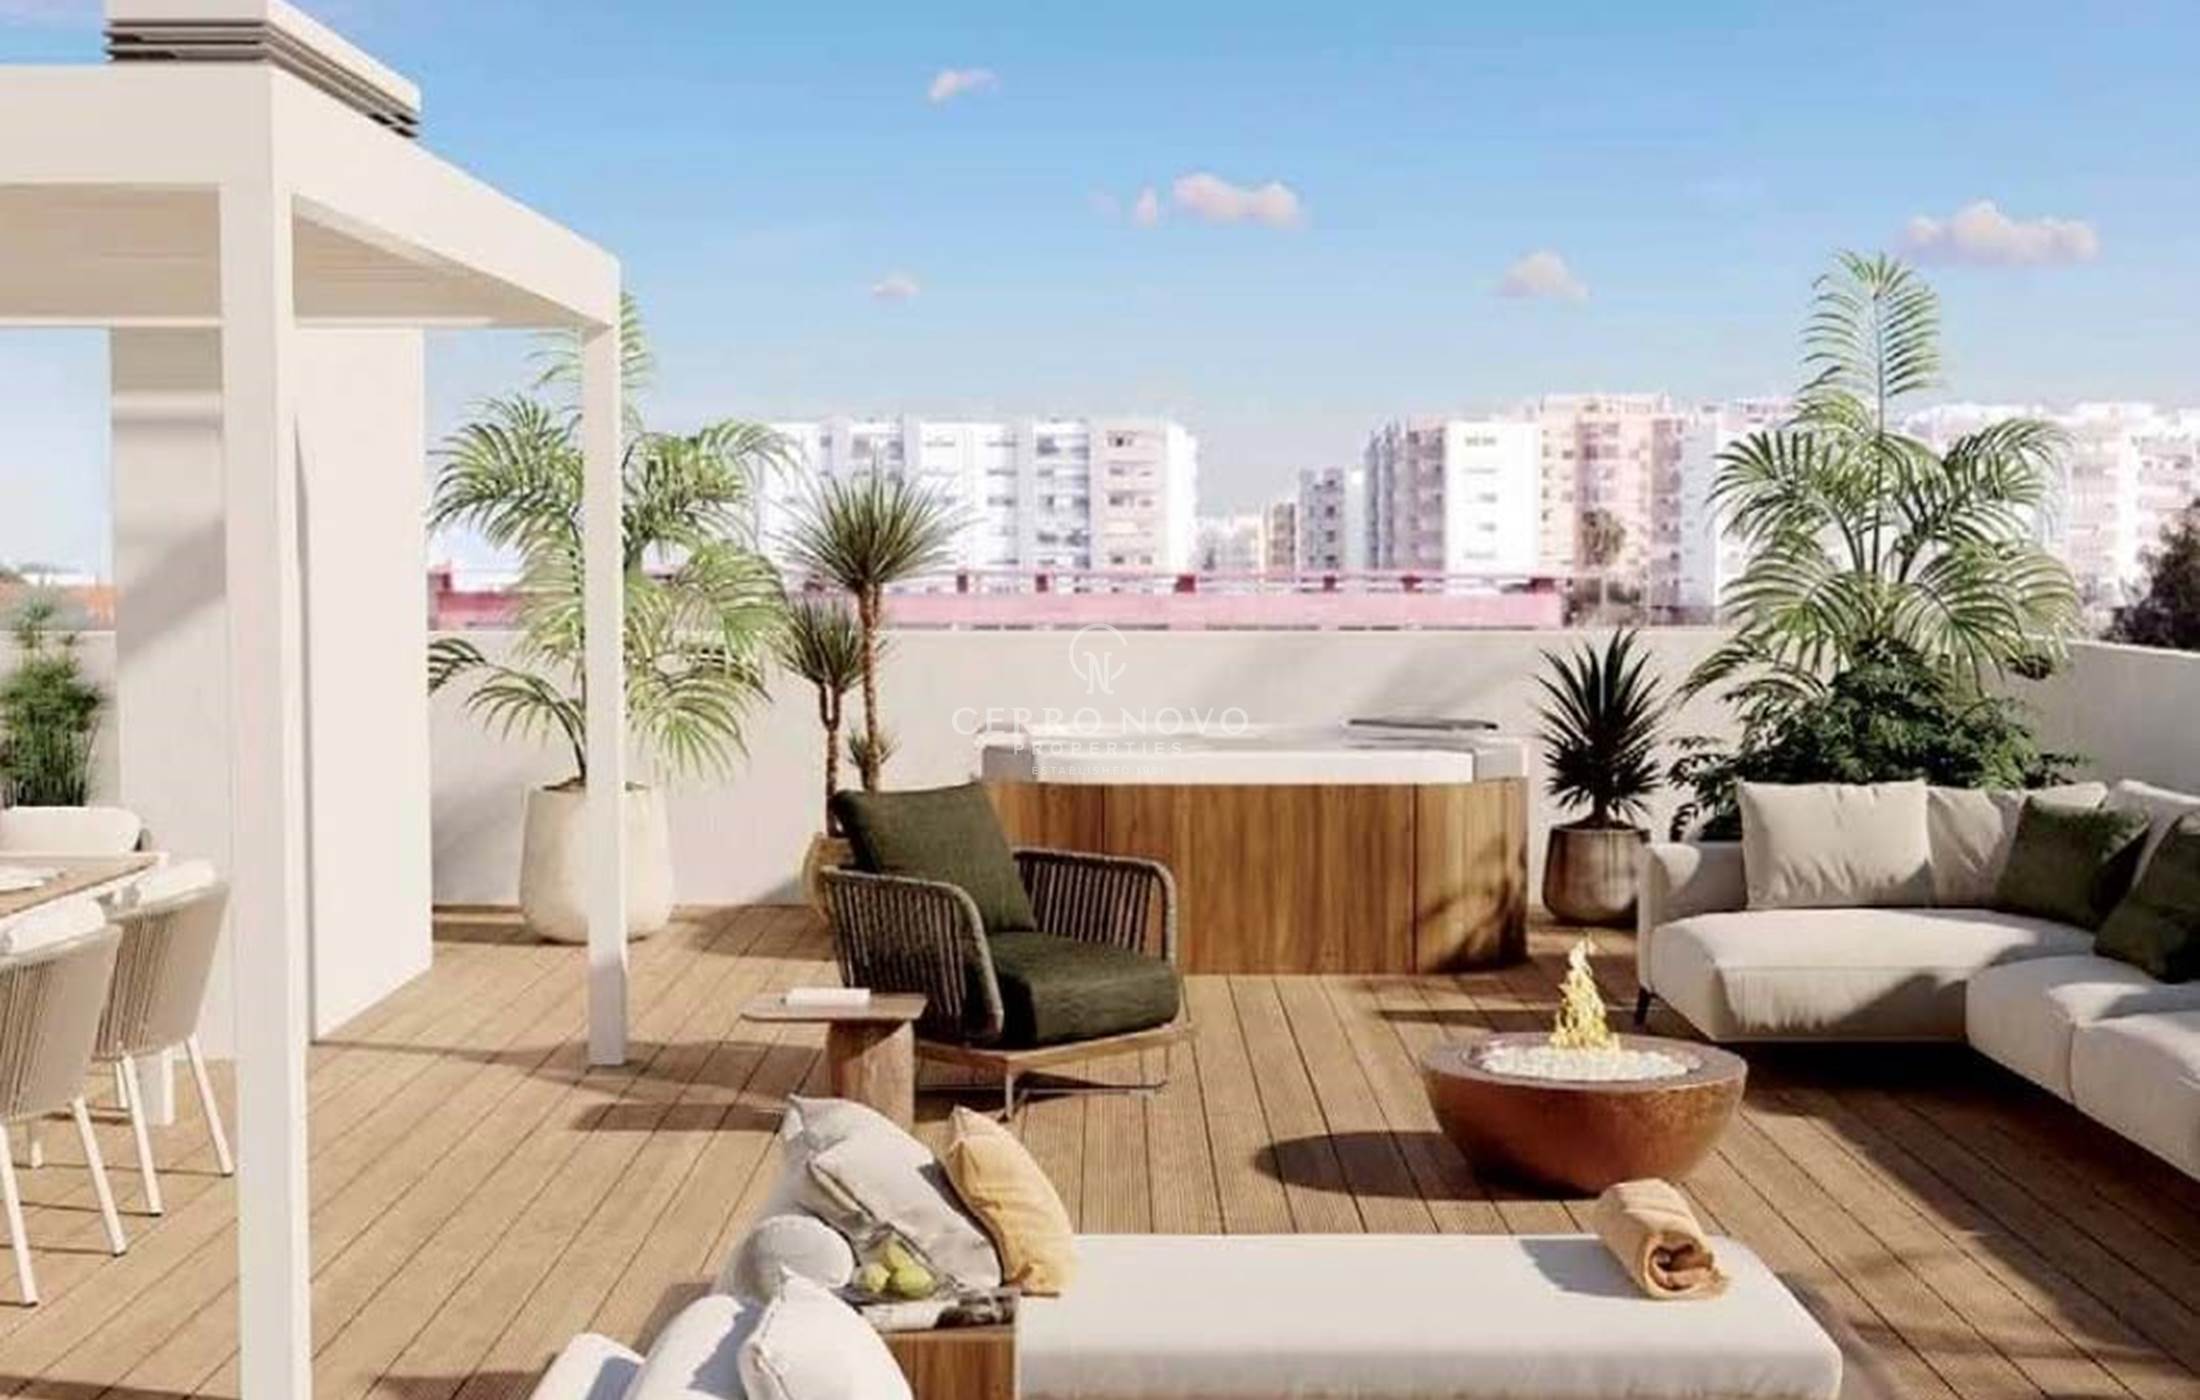 Fantastic 1 to 3-bedroom apartments  and duplexes with access to swimming pools and leisure areas